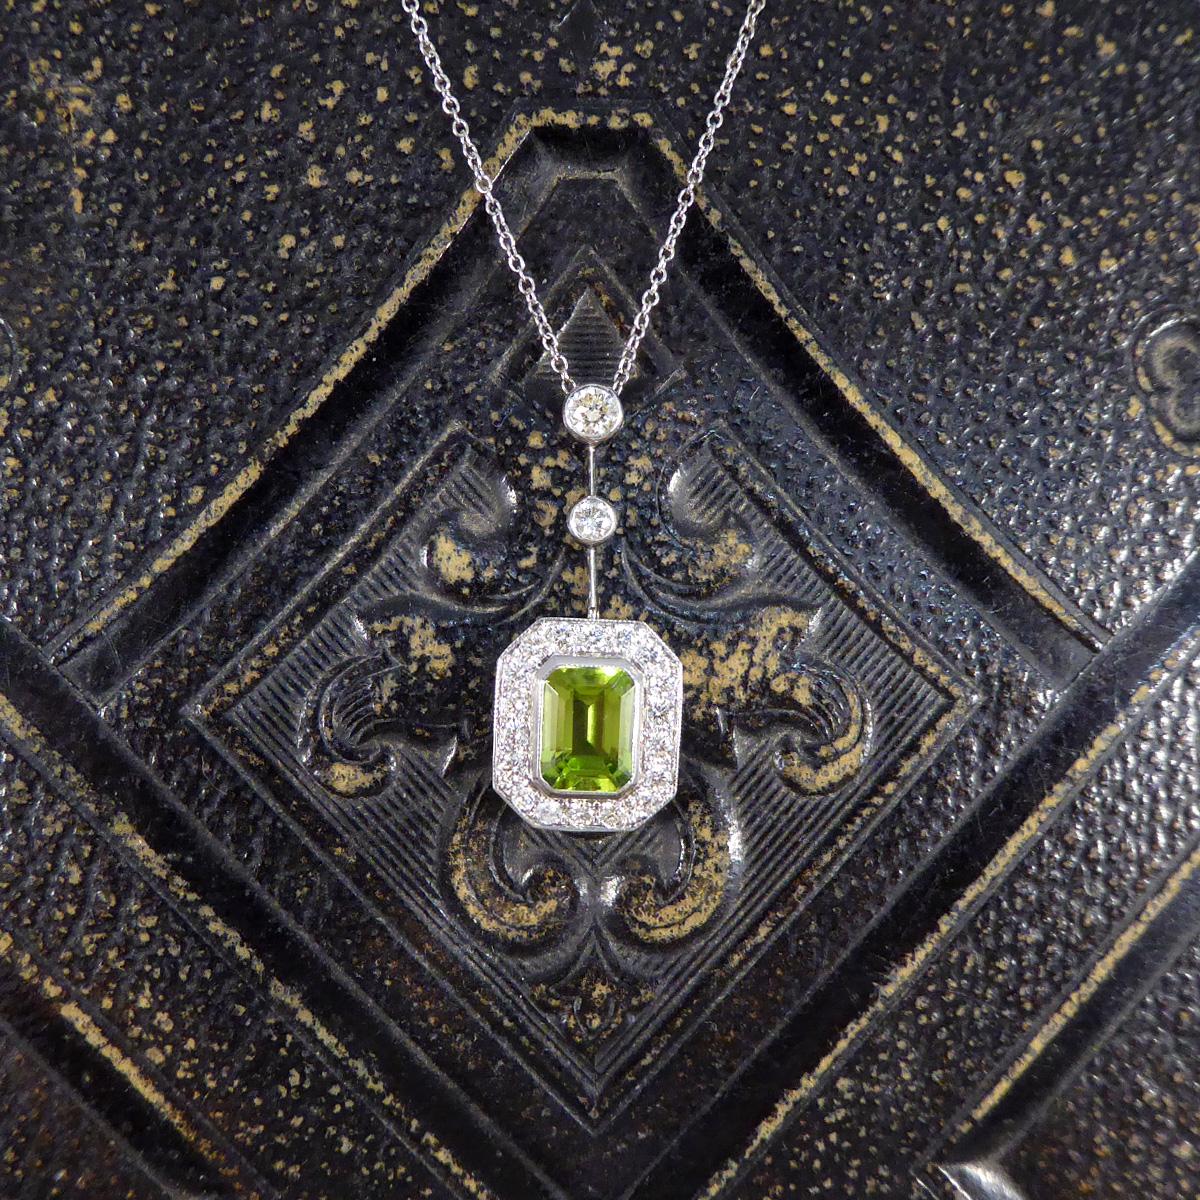 This beautiful contemporary necklace has been hand crafted from 18ct White Gold in an Art Deco style. It features an Emerald Cut Peridot in a slight millegrain edge setting weighing 2.25ct with a surround of 18 Diamonds, making it hold a total of